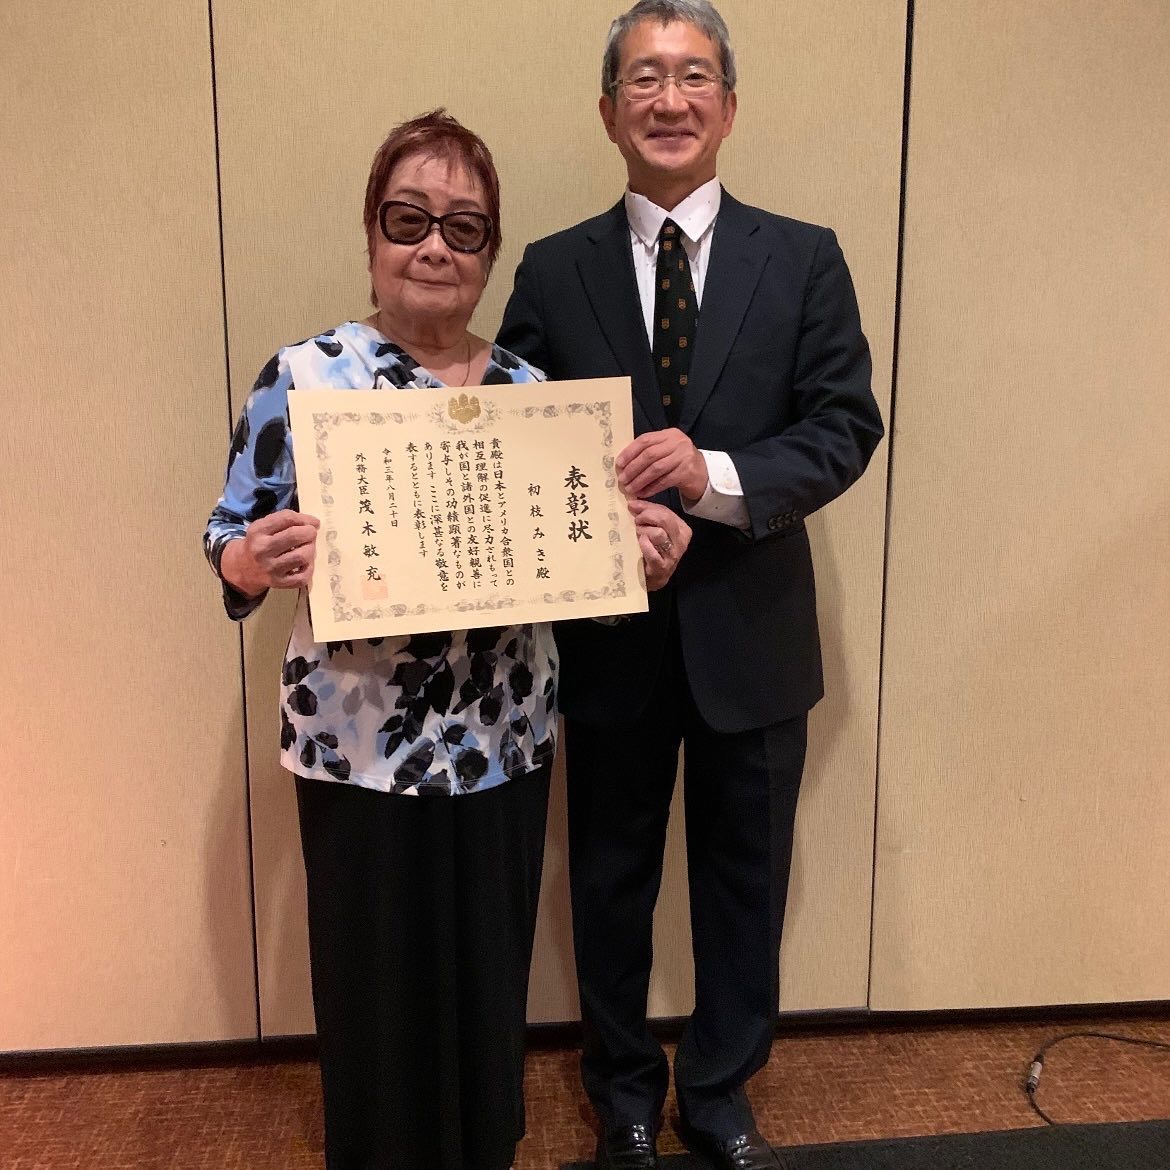 Consul General Nakai presented the Japanese Foreign Minister’s Certificate of Commendation to Ms. Hatsue Miki